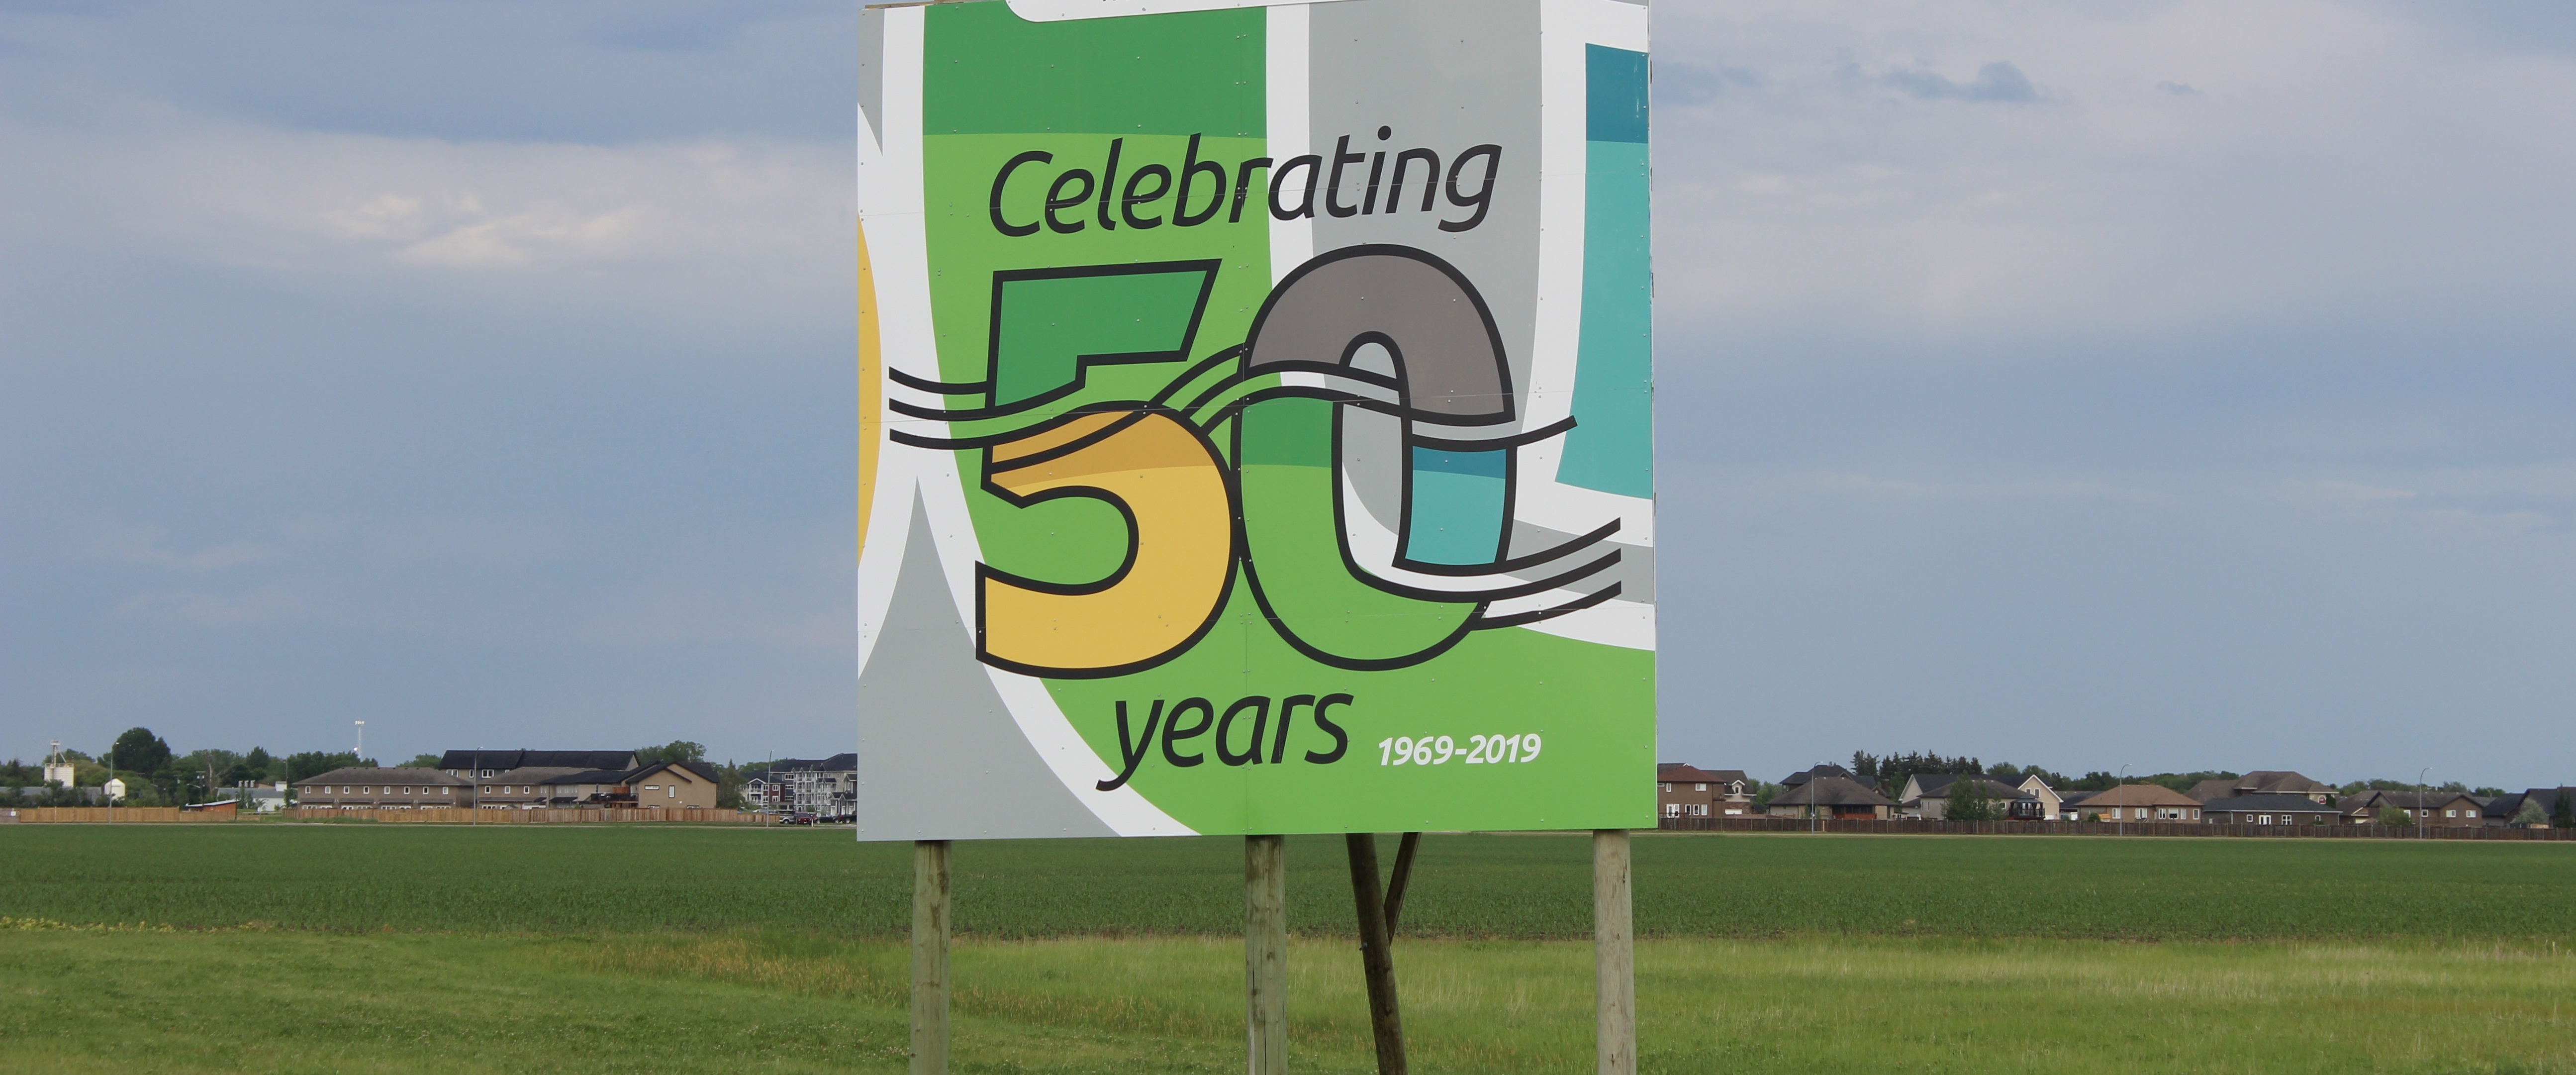 1 Niverville Celebrates 50 Years Of Incorporation Pic1 Crop